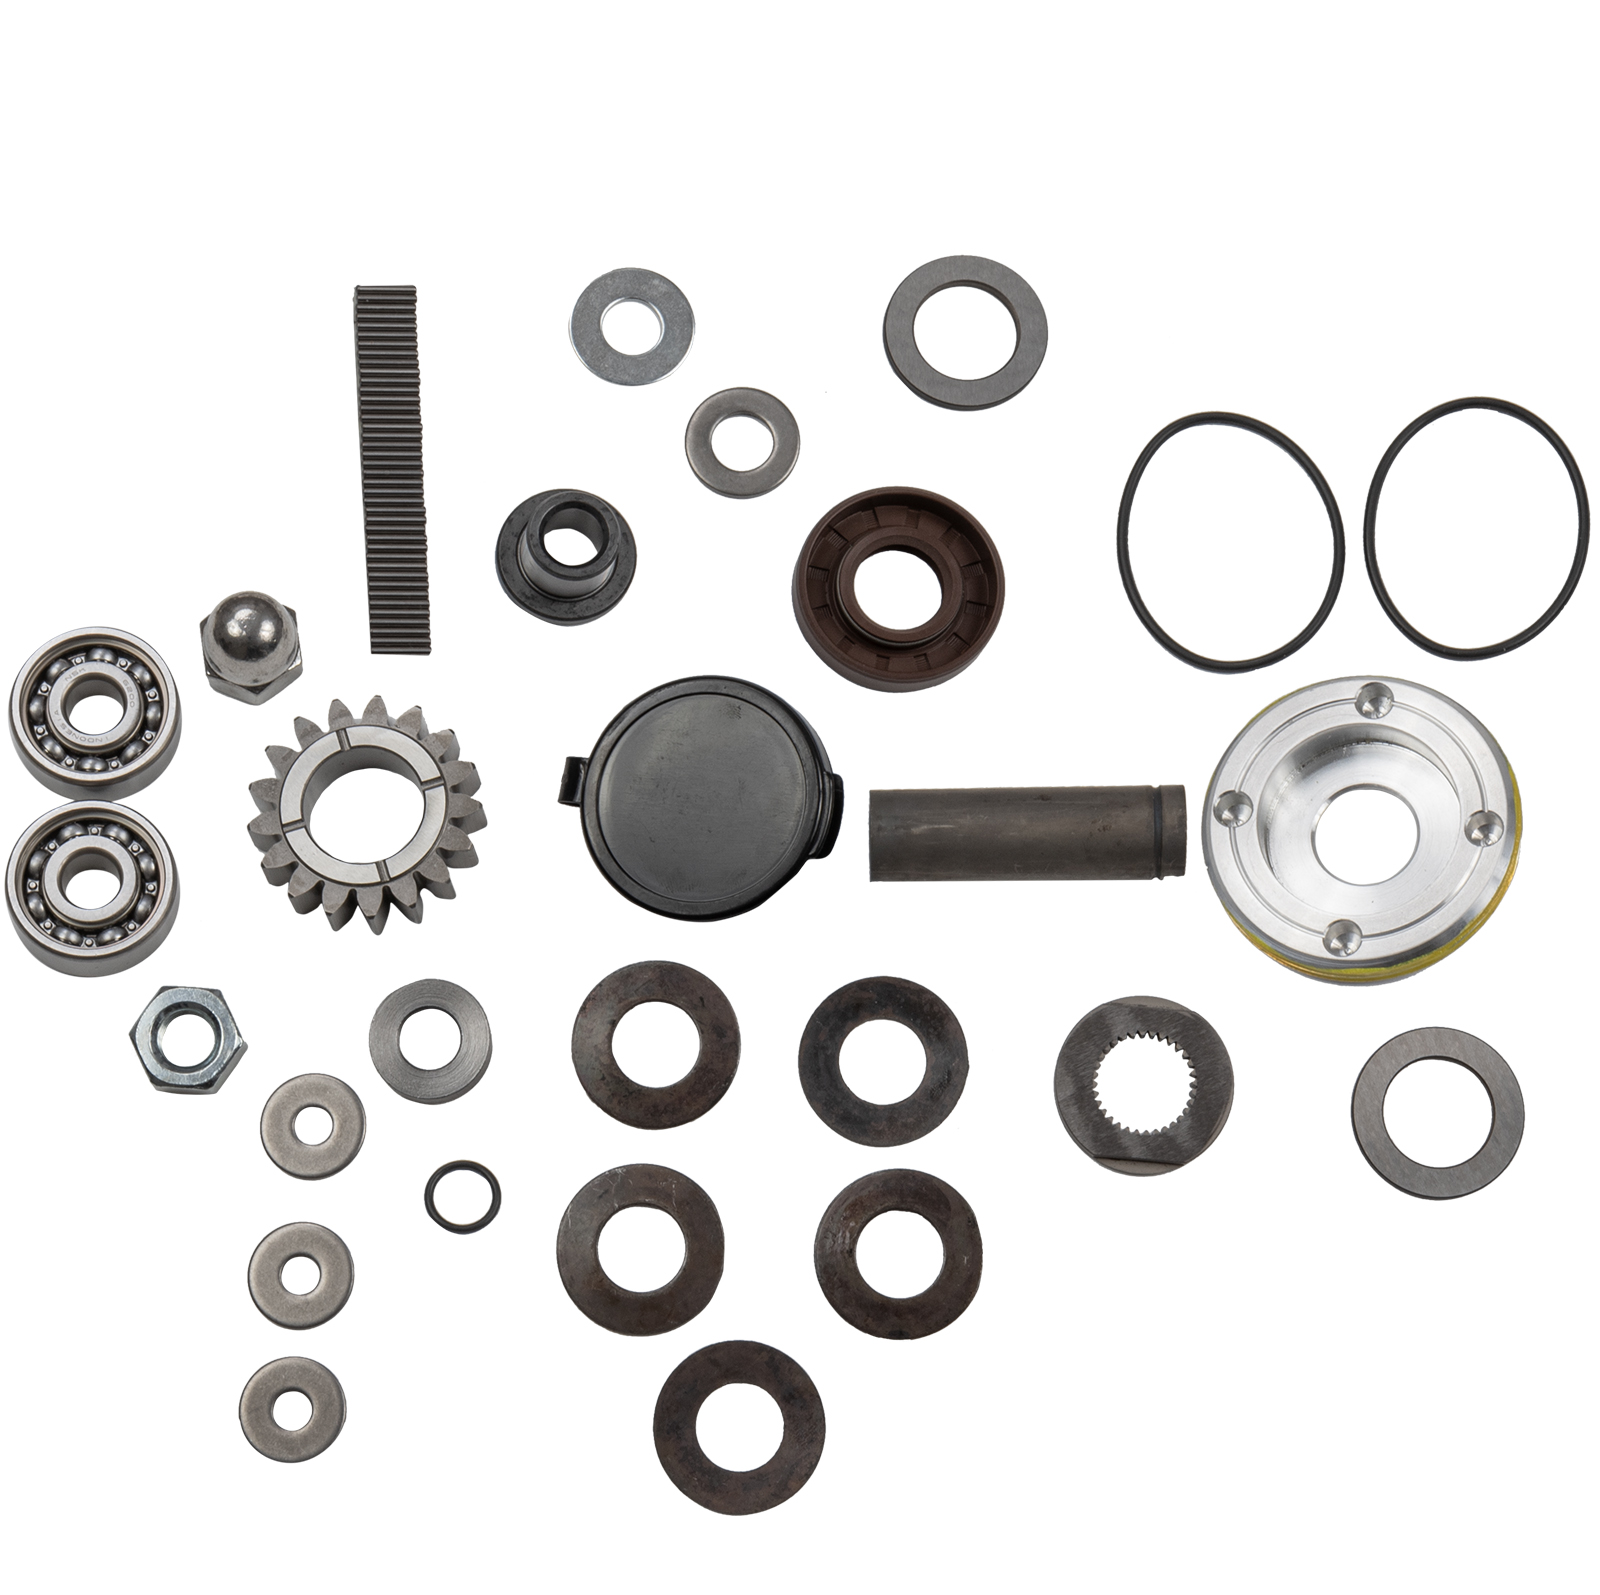 Super Charger Rebuild Kit (185HP) 17 tooth SBT